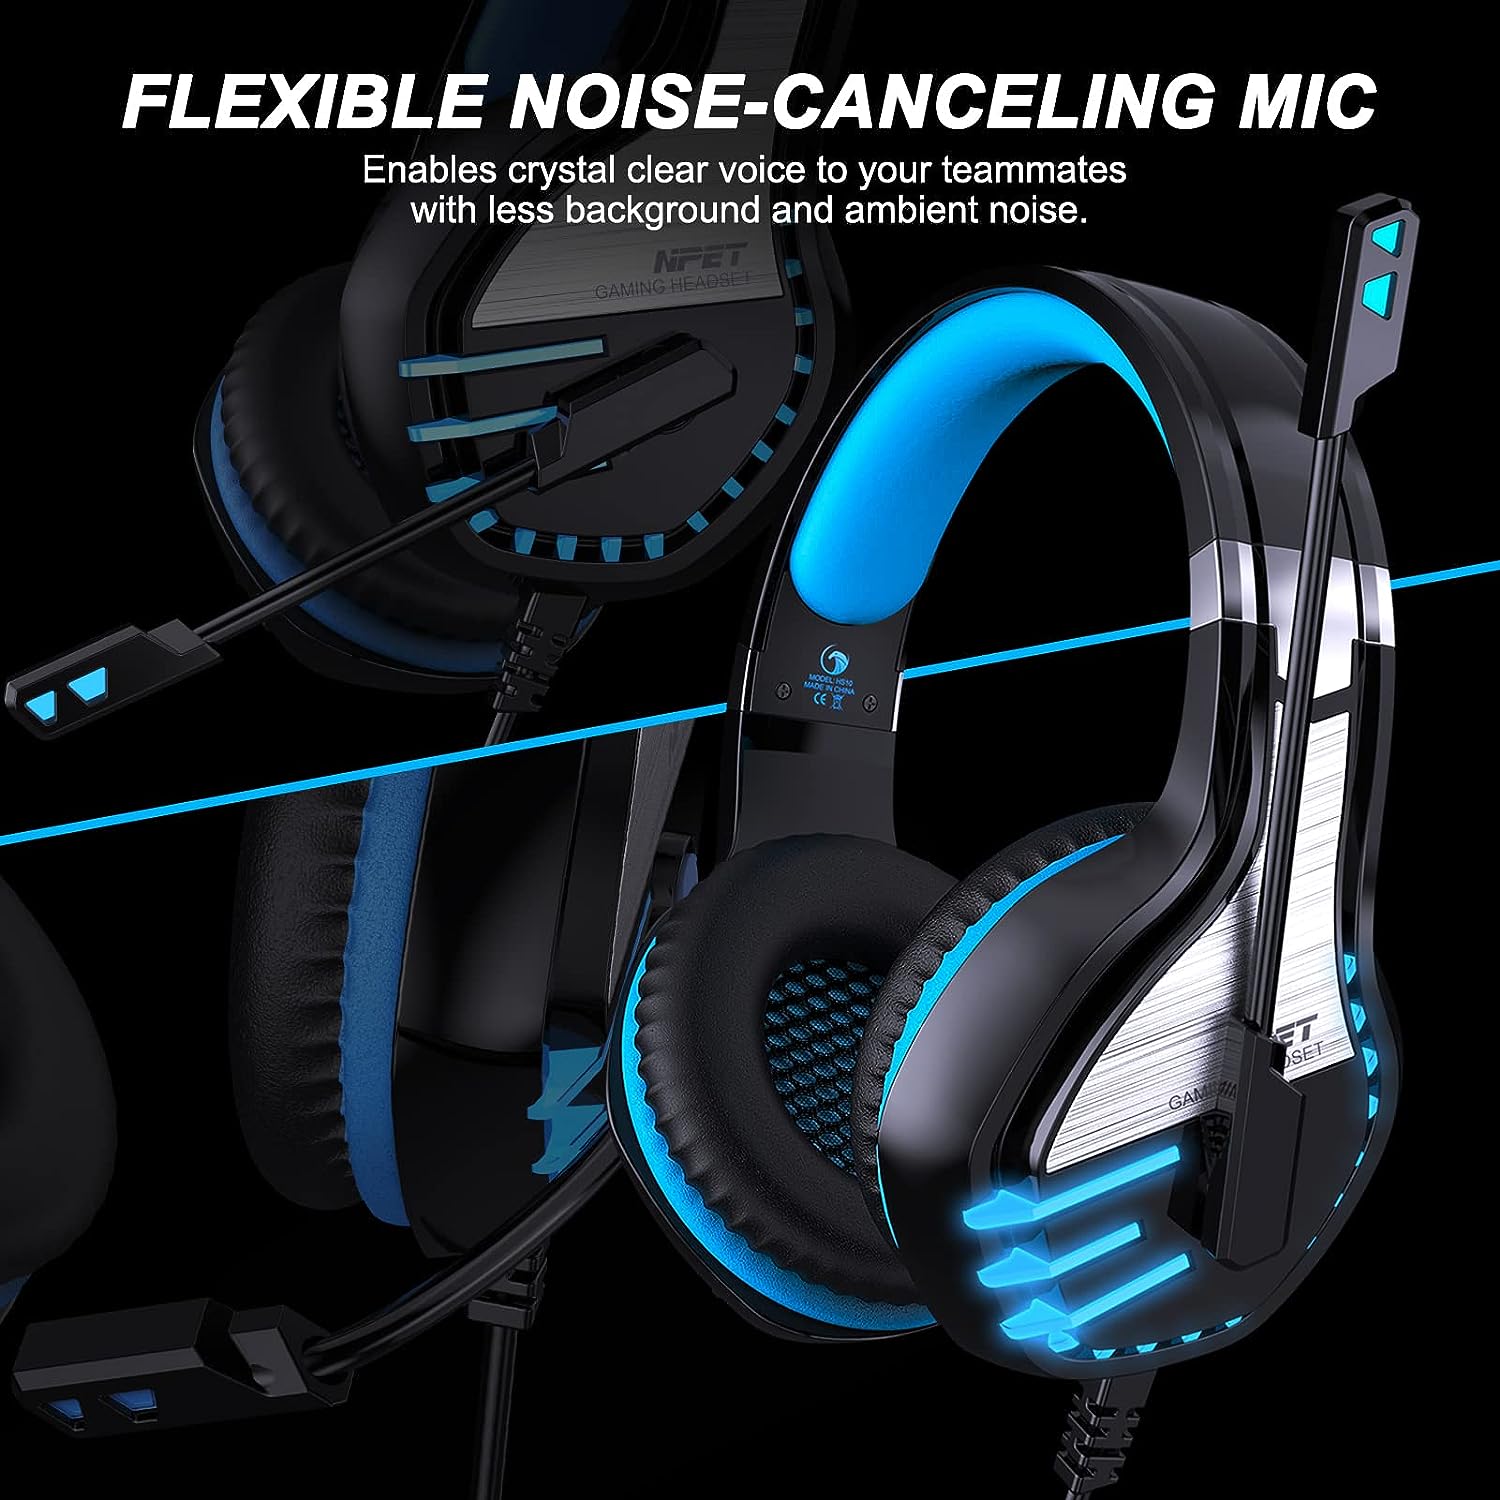 NPET HS10 Stereo Gaming Headset for PS4 PC Xbox One PS5 Controller, Noise Cancelling Over Ear Headphones with Mic, Bass Surround, Soft Memory Earmuffs for Laptop Mac Nintendo NES Games Blue